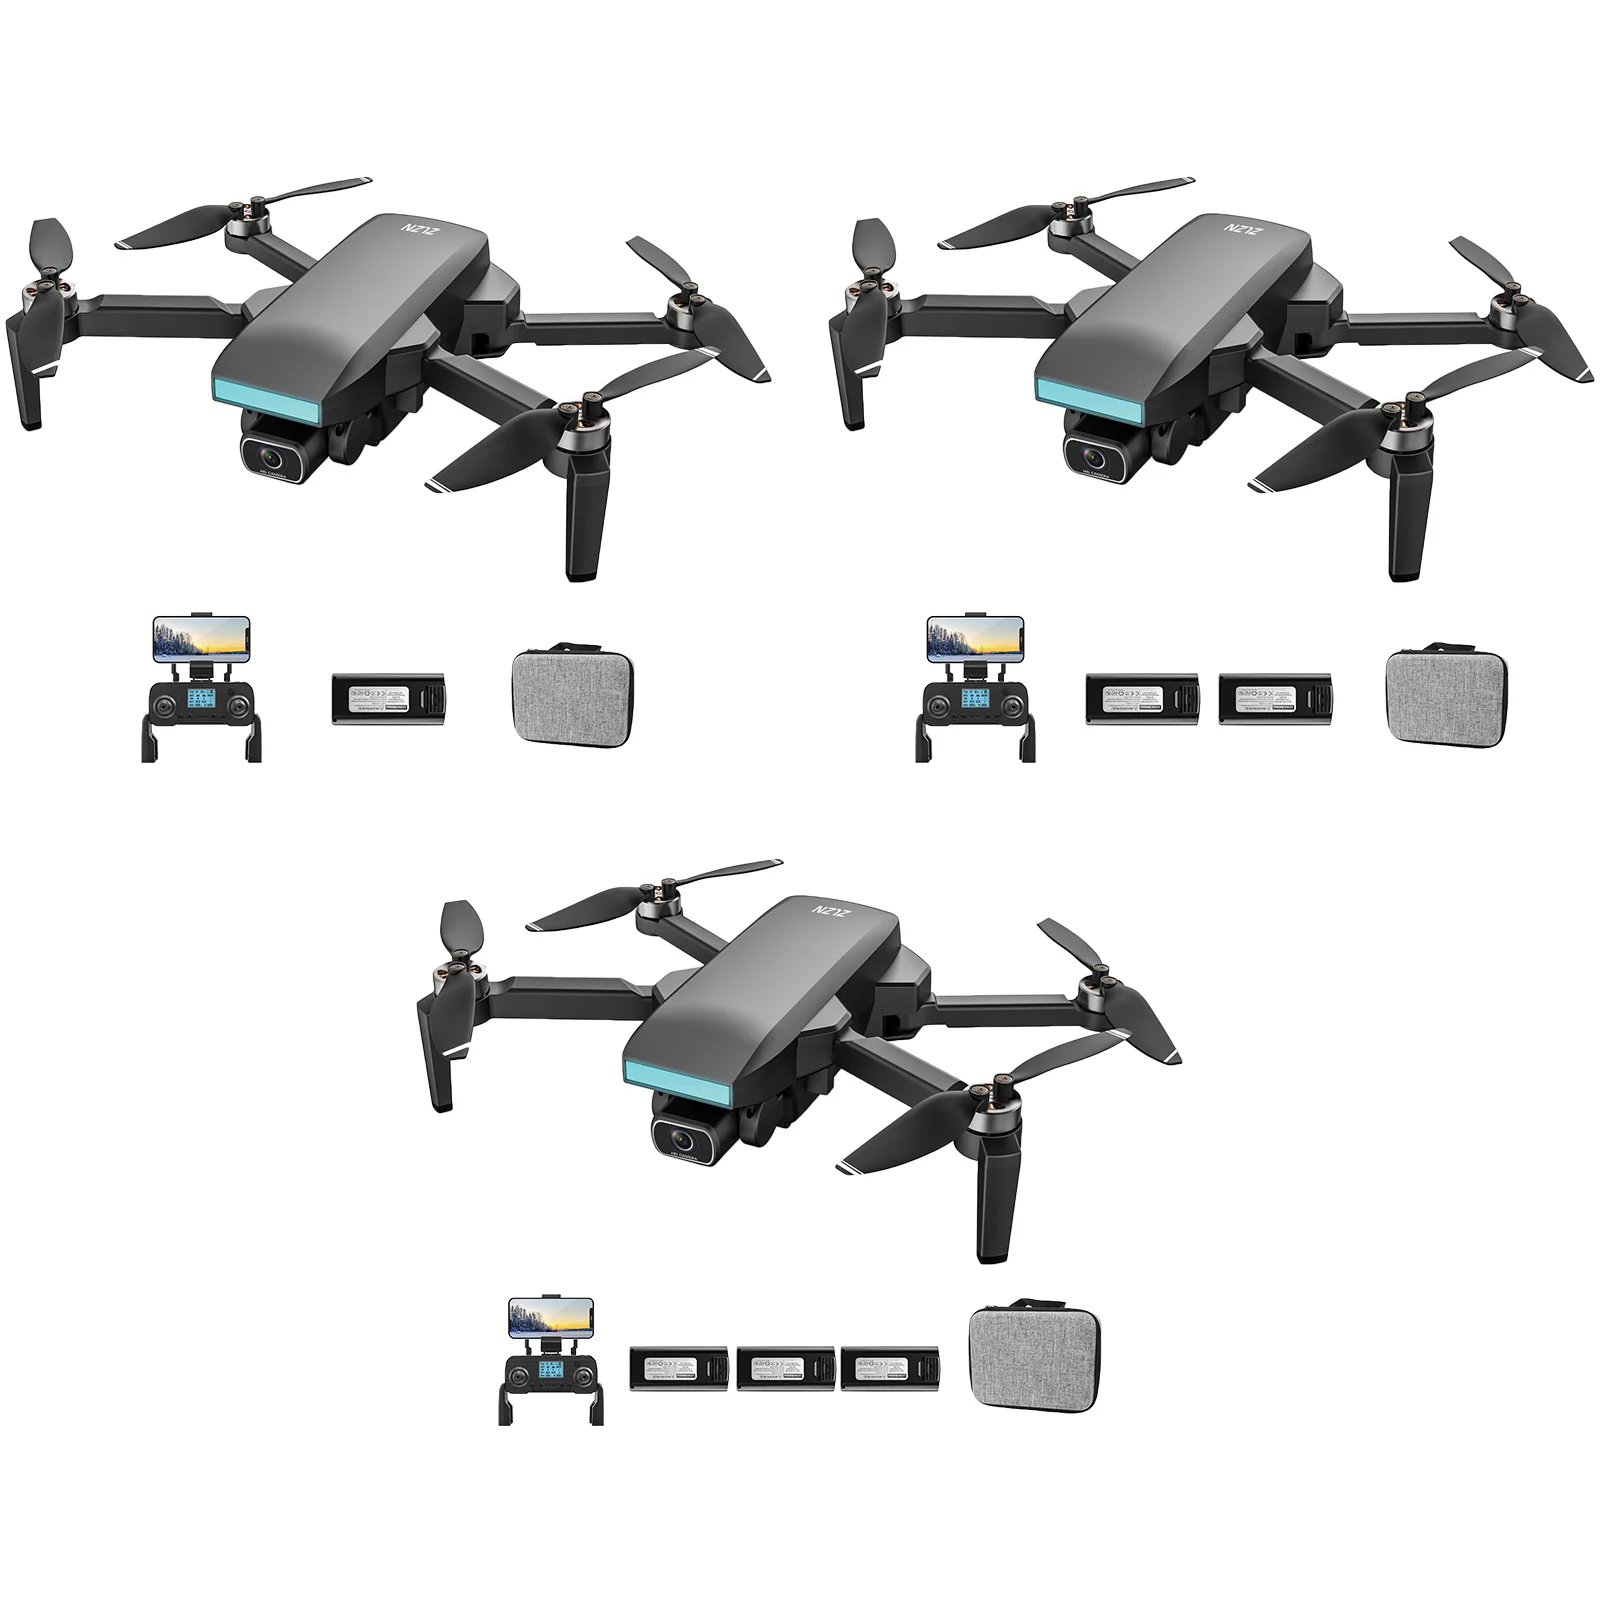 ZLL SG107 Pro RC Drone 4K HD Dual Camera 5G FPV GPS FQuadcopte RC Drone Foldable RC Quad Axis Brushless Motor Aircraft enlarge